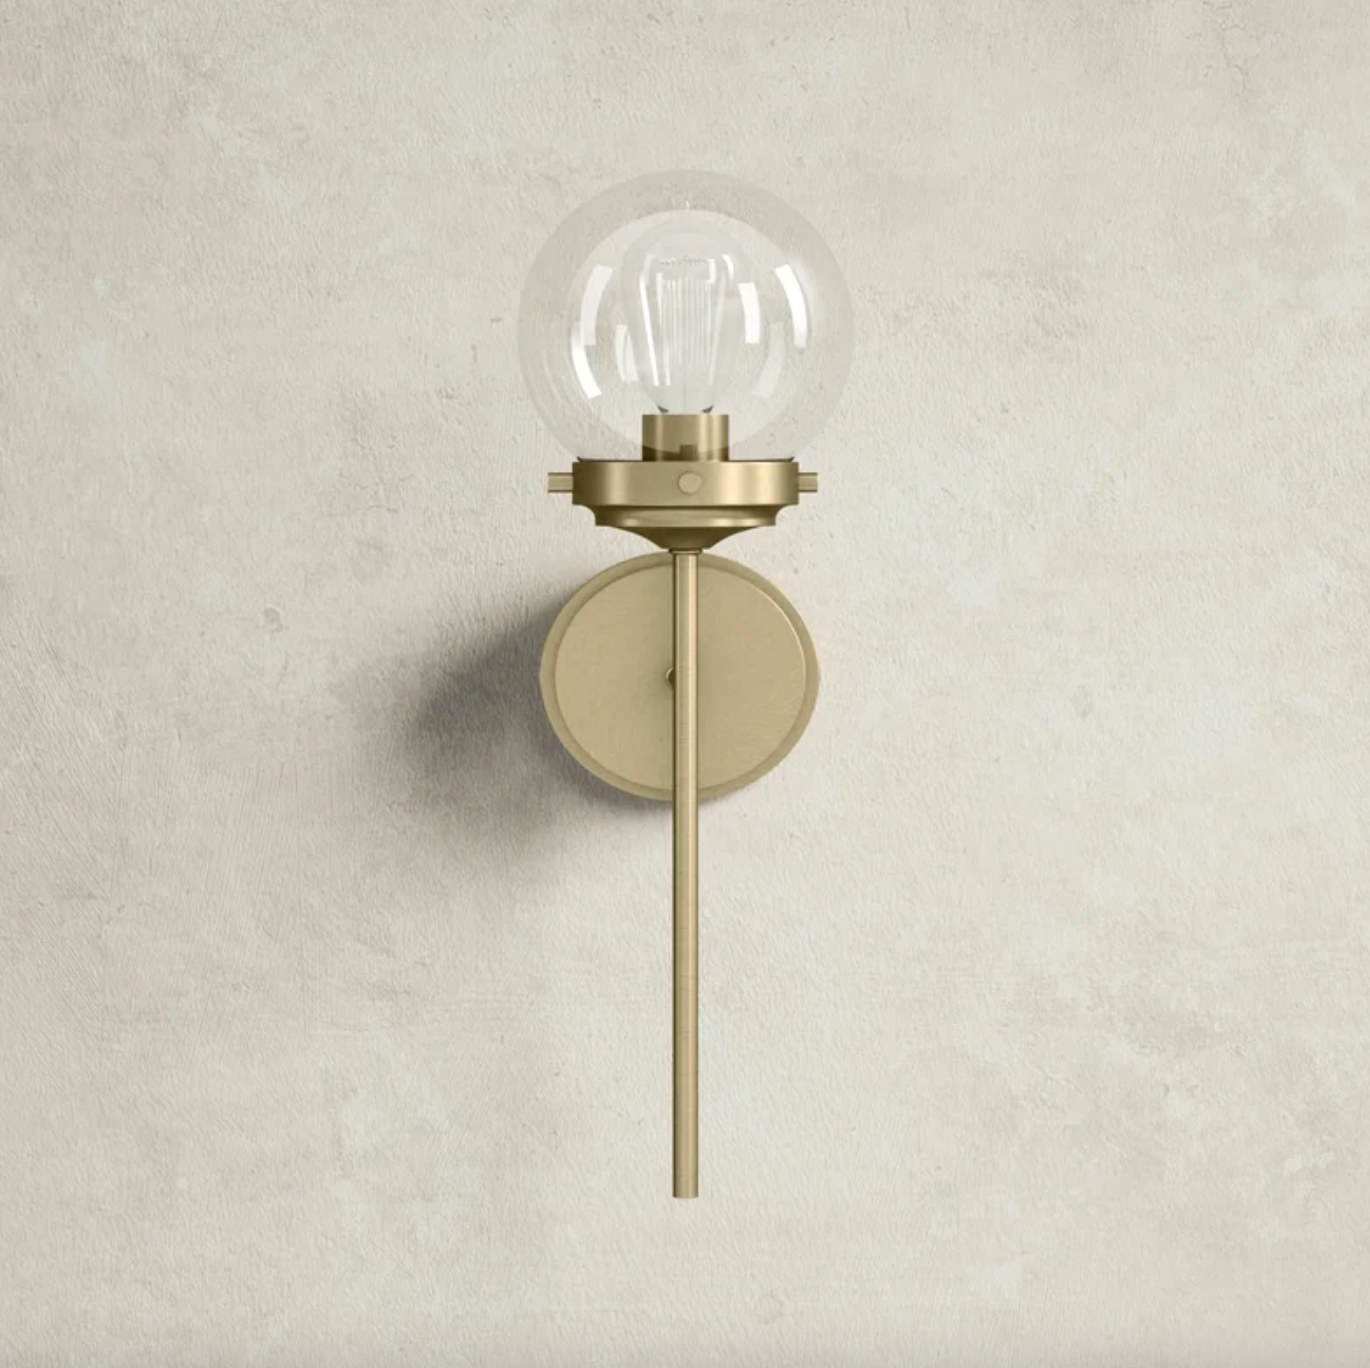 The dimmable wall sconce